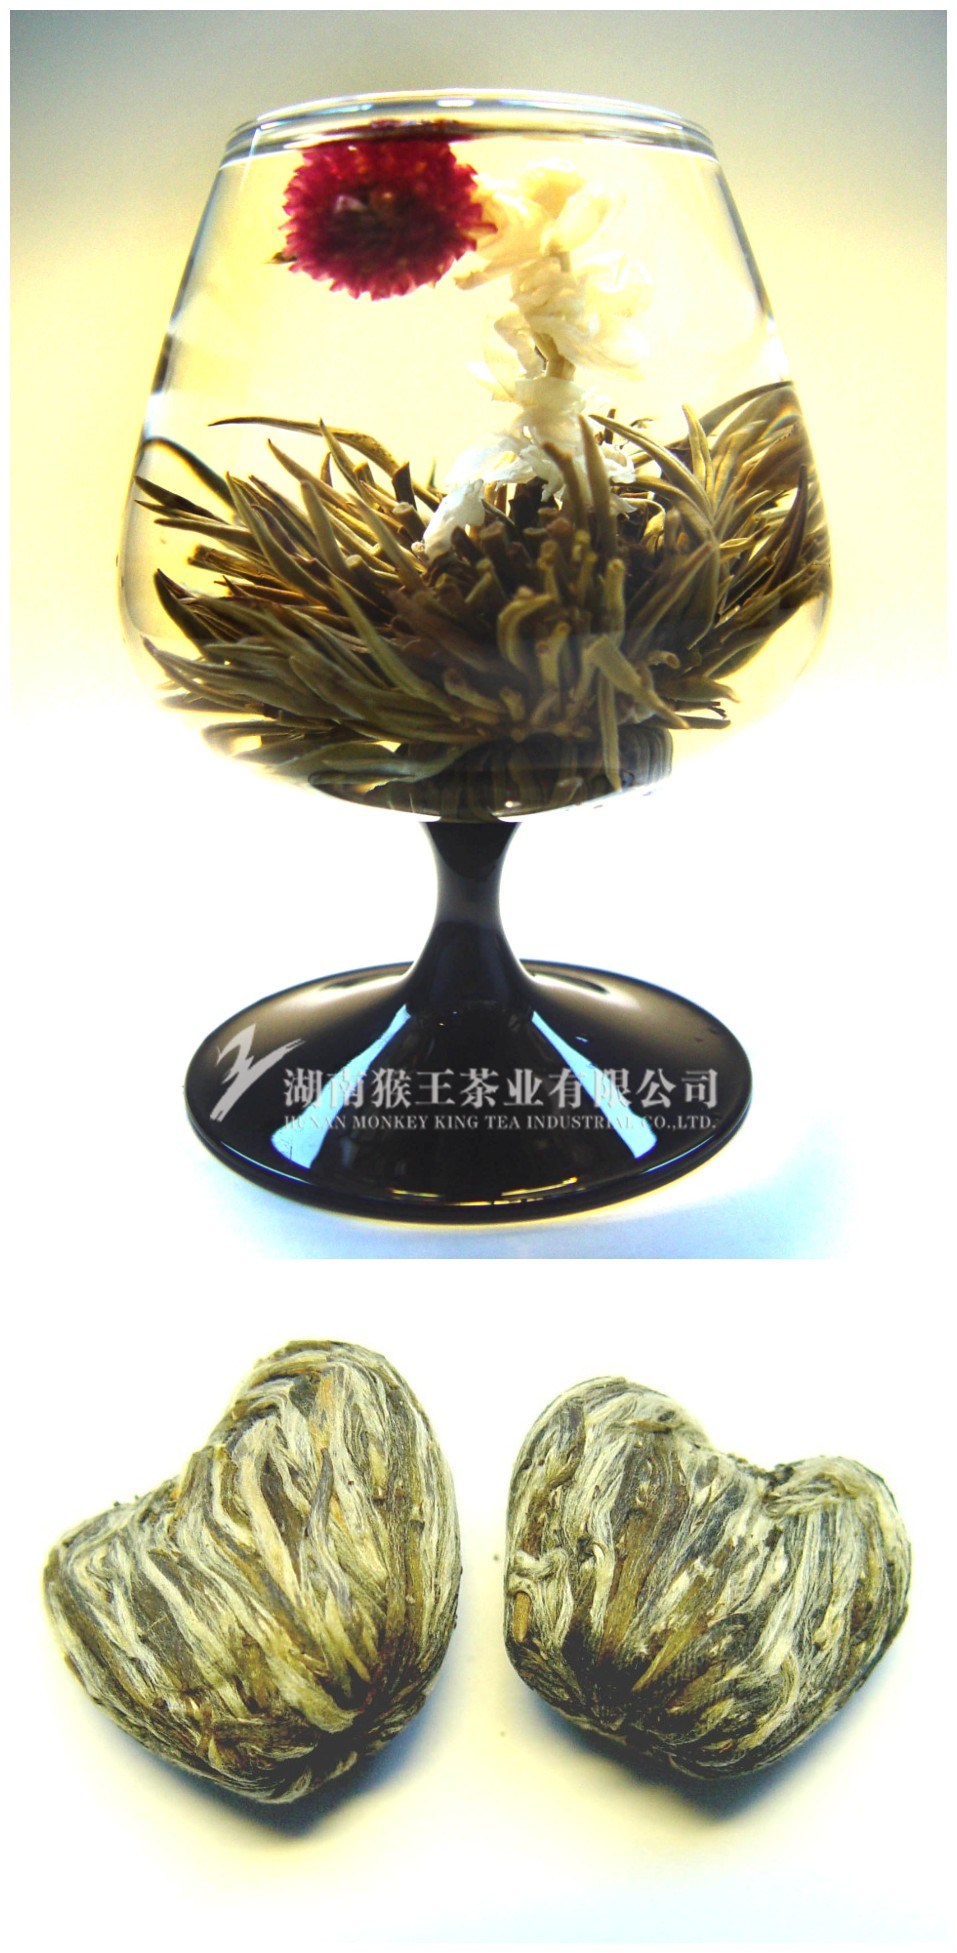 Speciality 100% Natural Flower Tea, Hand-Made Beauty Tea, Blooming Summer Dream 8907